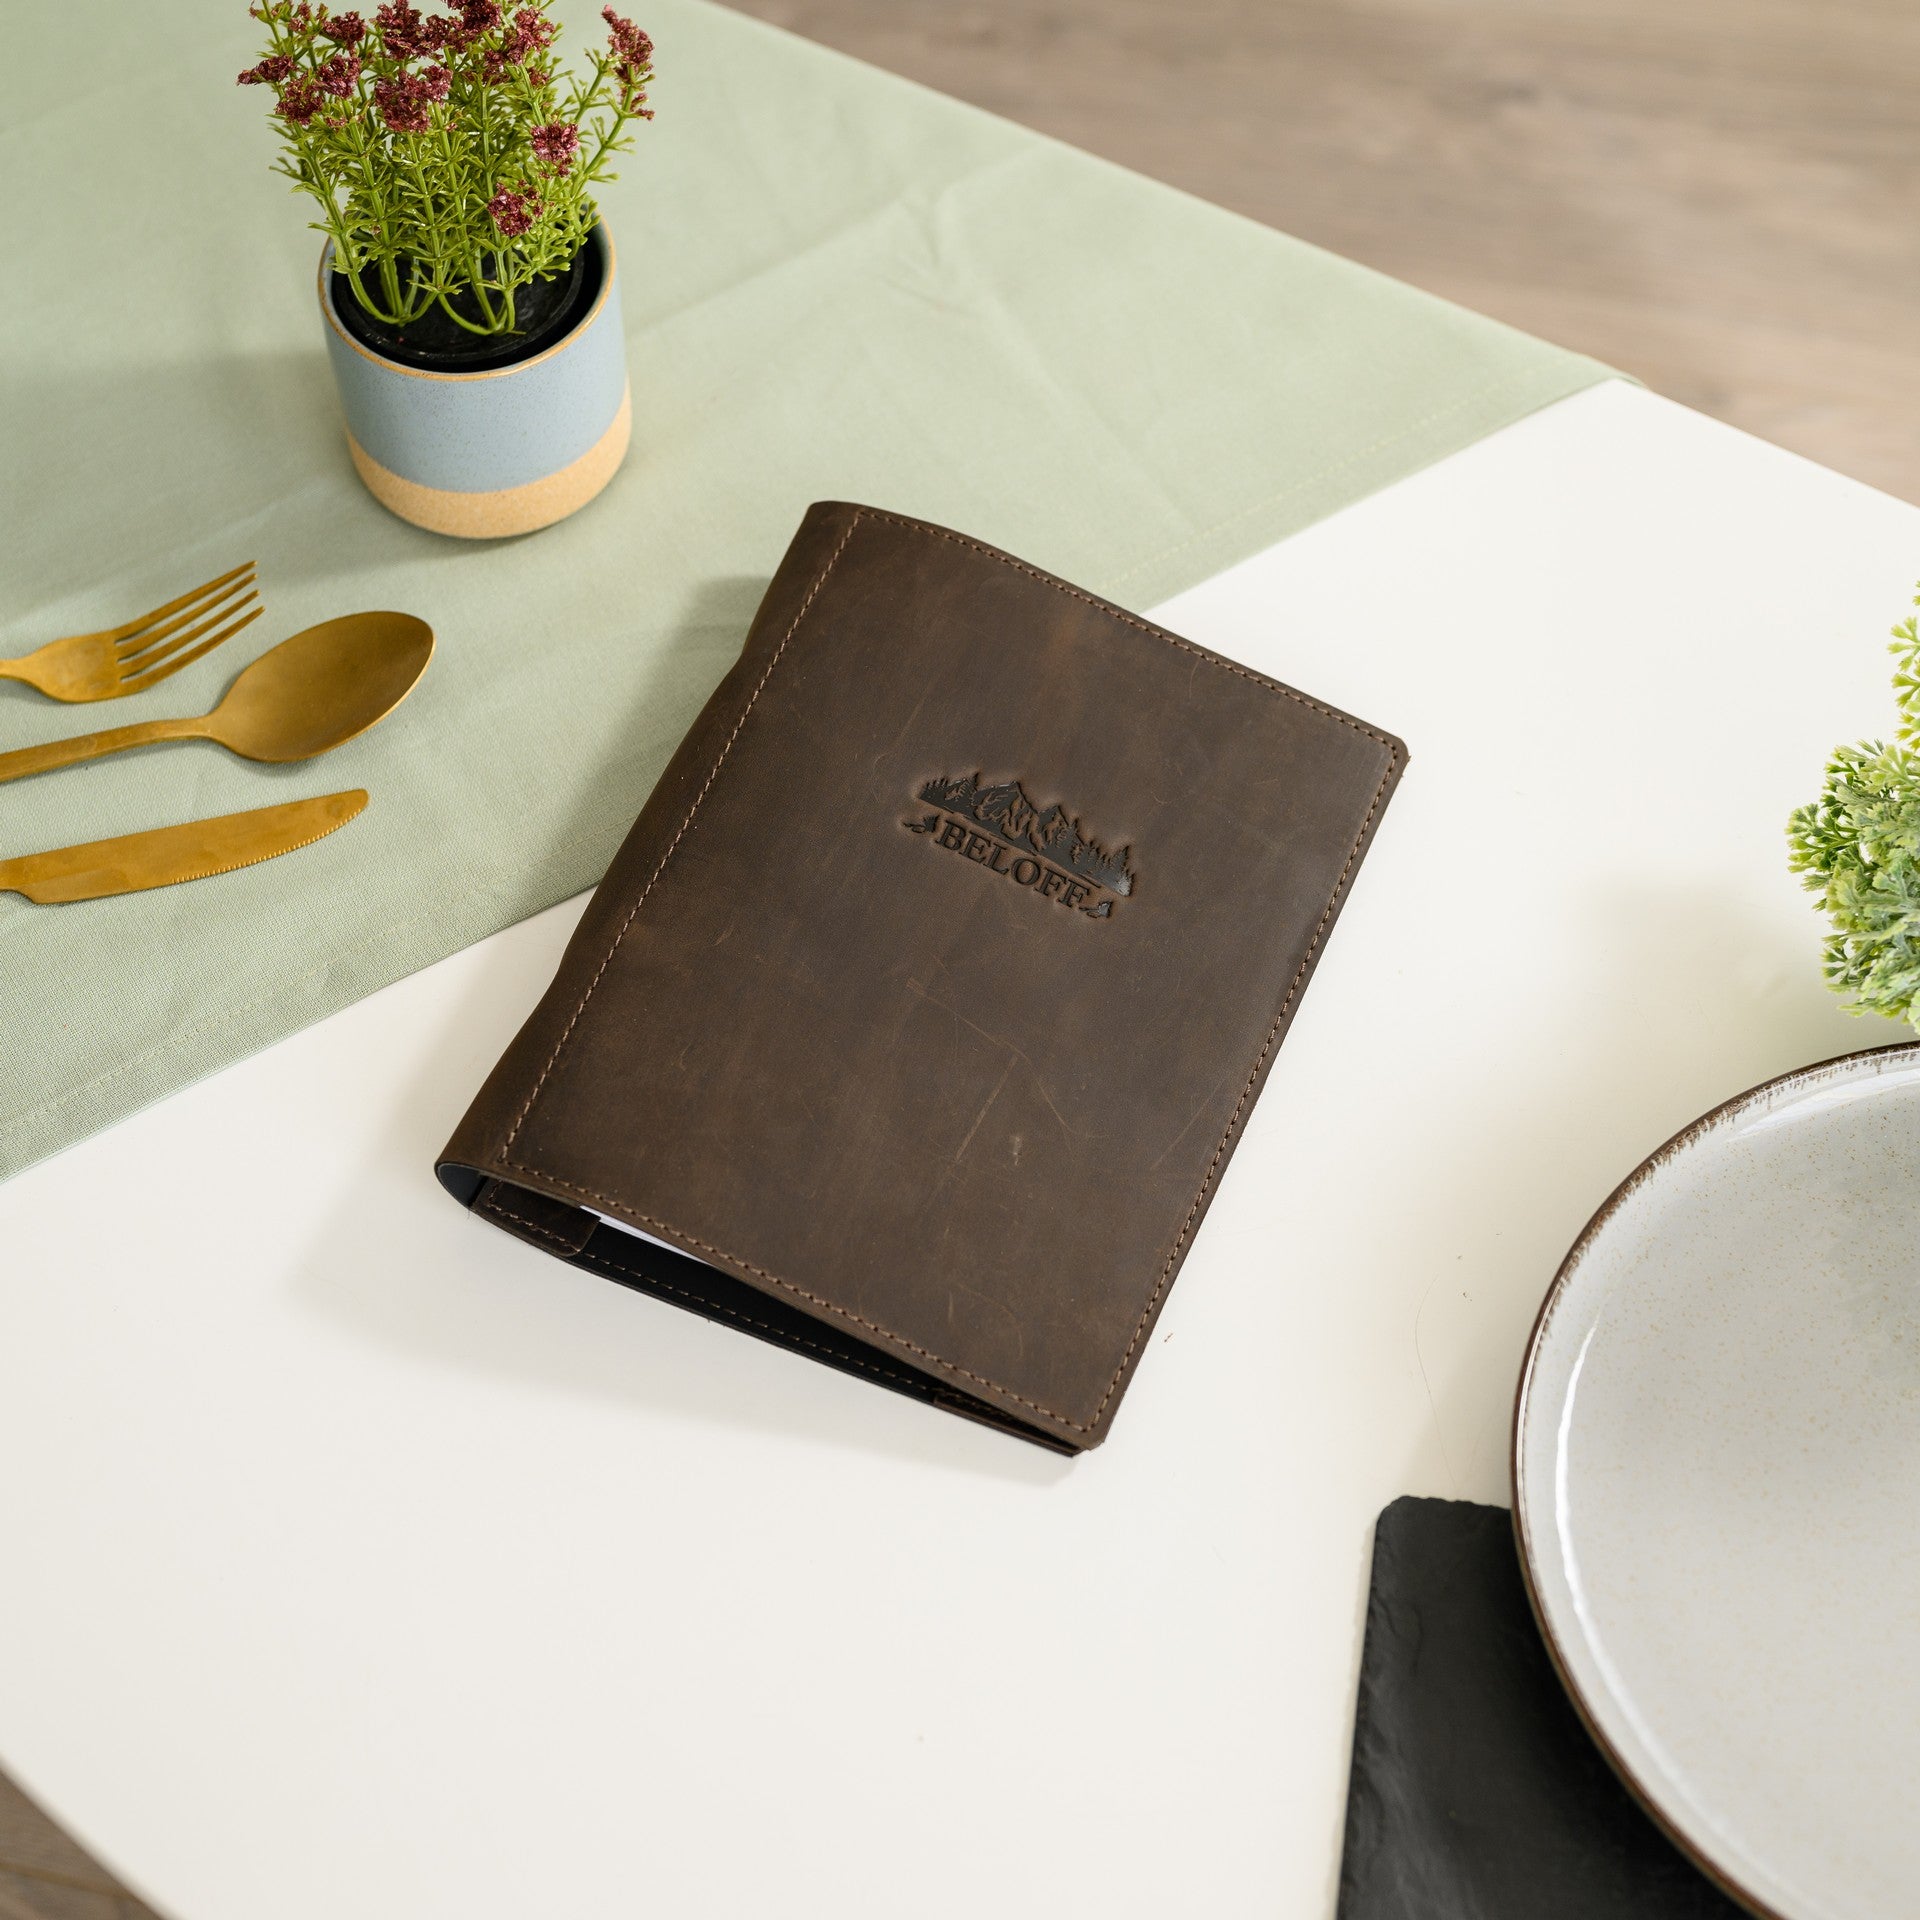 Discover the perfect blend of craftsmanship and style with our handcrafted menu, customized with logo embossing.